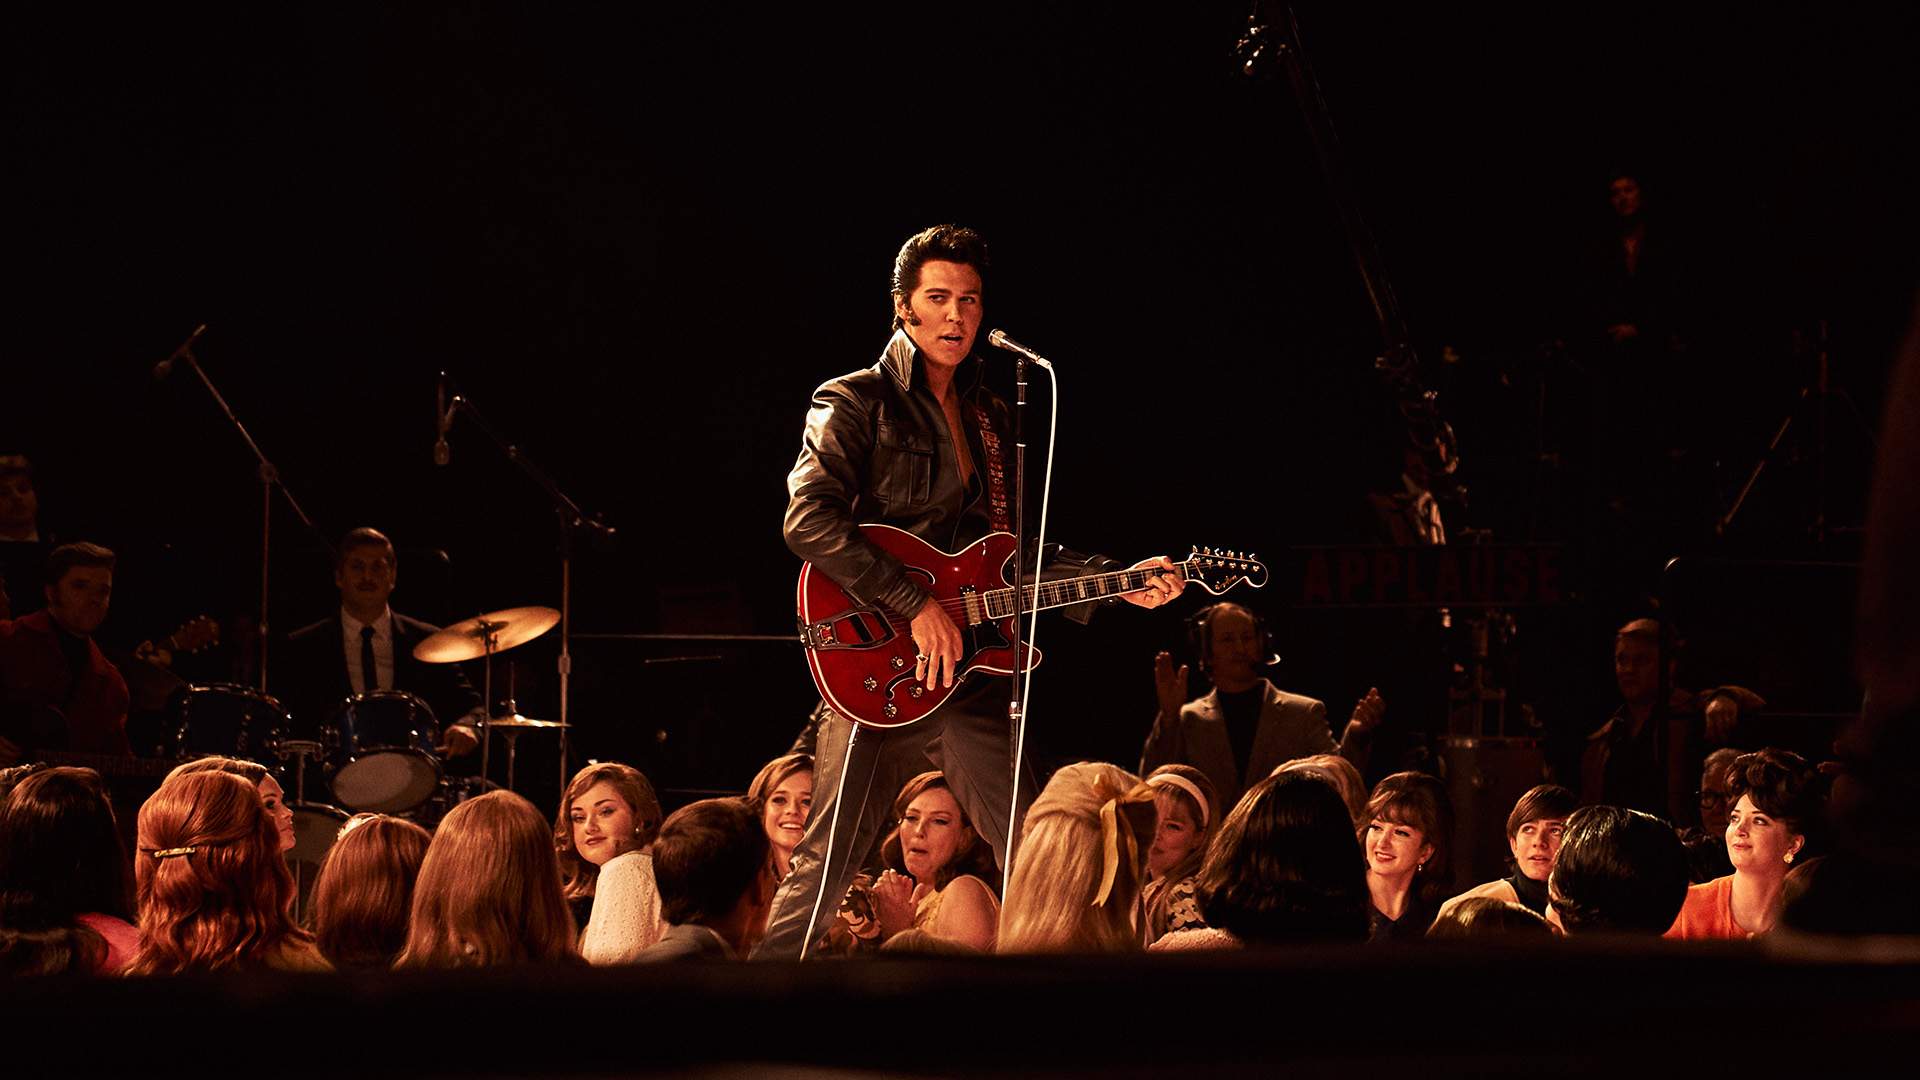 The Latest Trailer for Baz Luhrmann's 'Elvis' Is Here to Get You All Shook Up